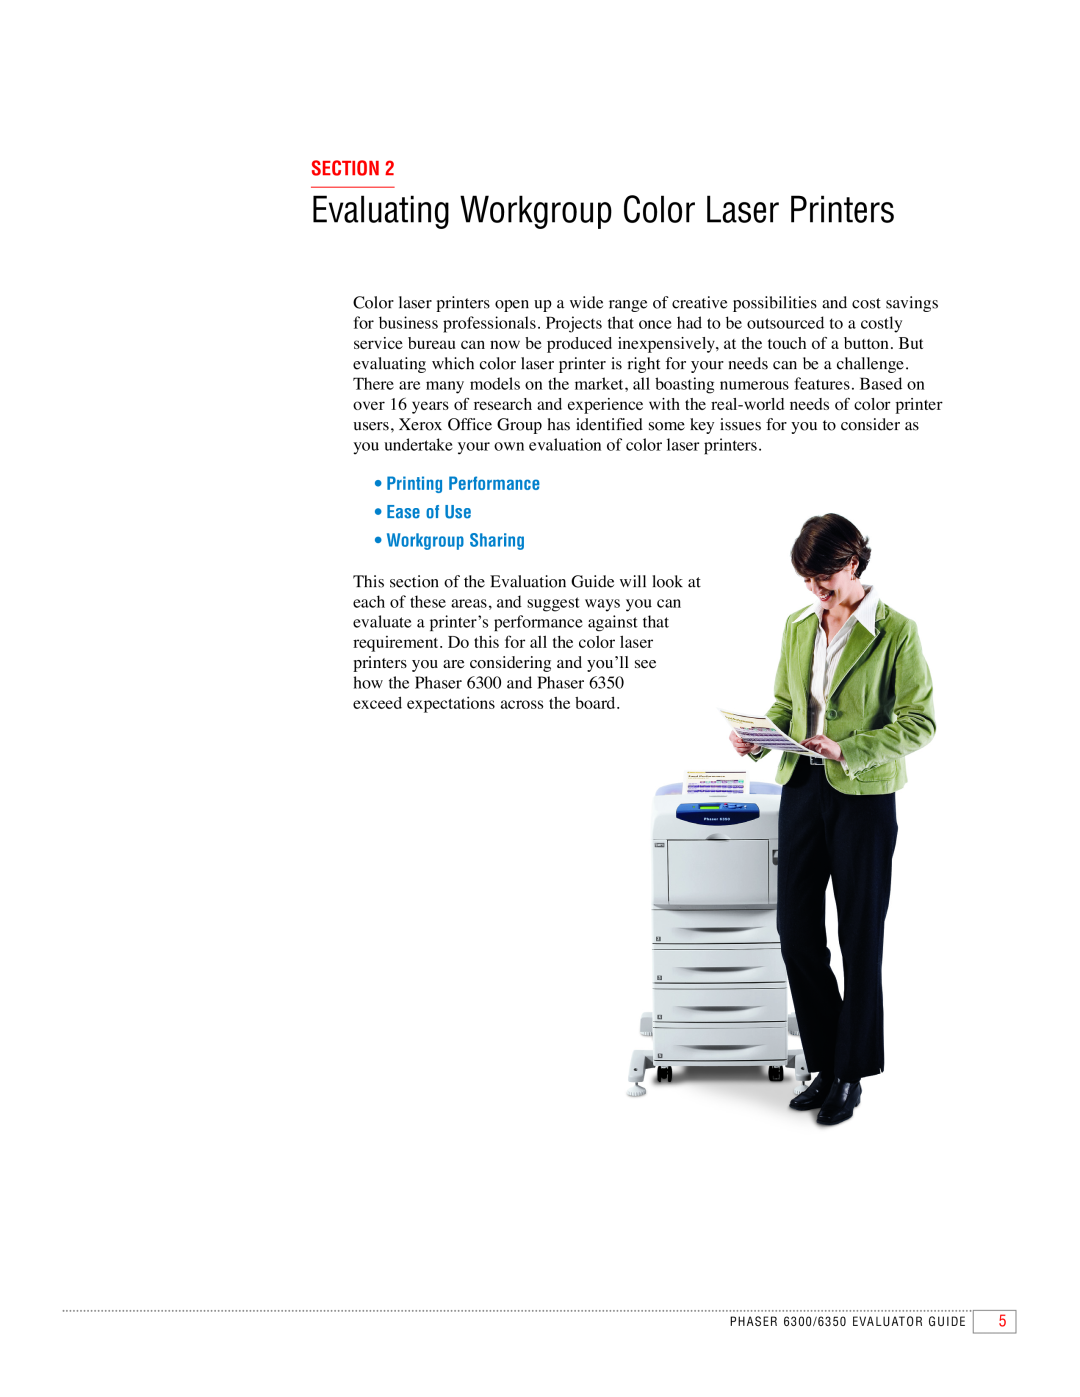 Xerox 6300, 6350 Evaluating Workgroup Color Laser Printers, Printing Performance Ease of Use, Workgroup Sharing, Section 